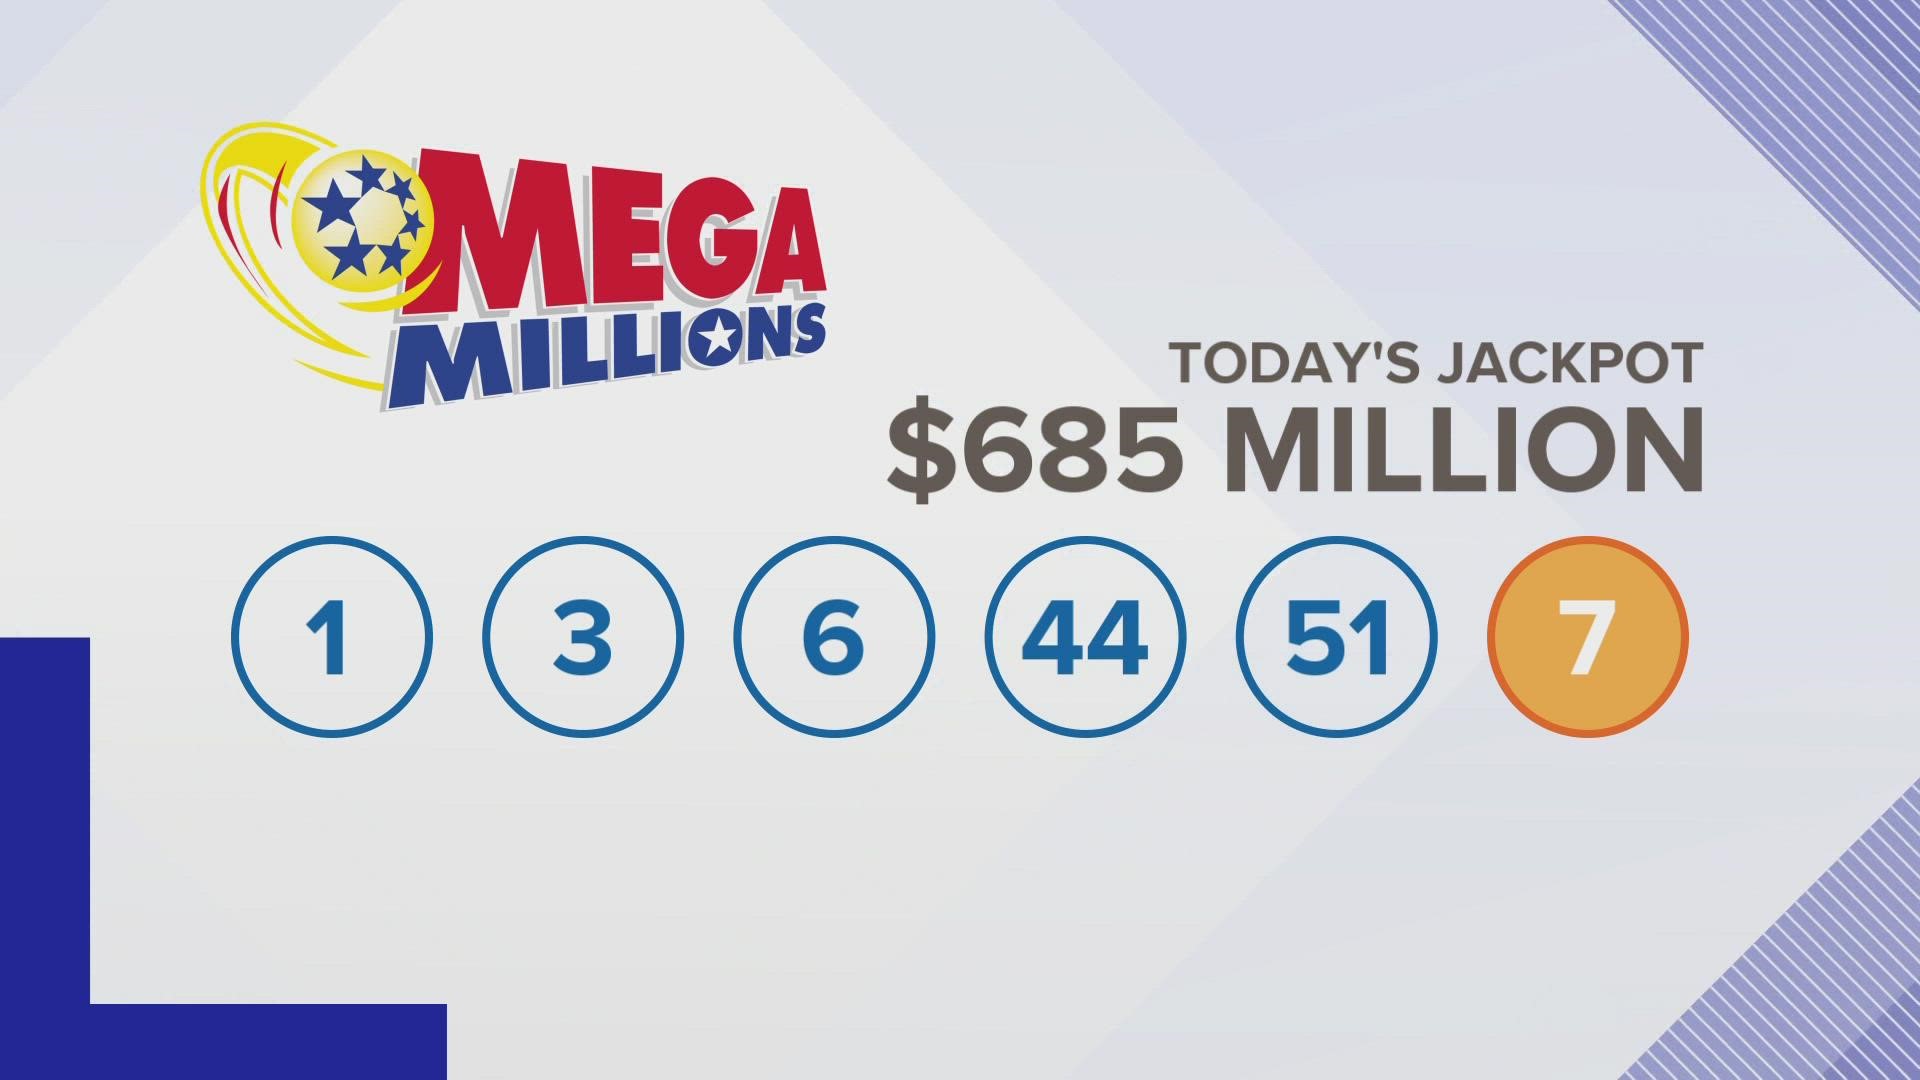 The jackpot increased to $685 million ahead of Friday night's drawing after 21 straight drawings without a winner.